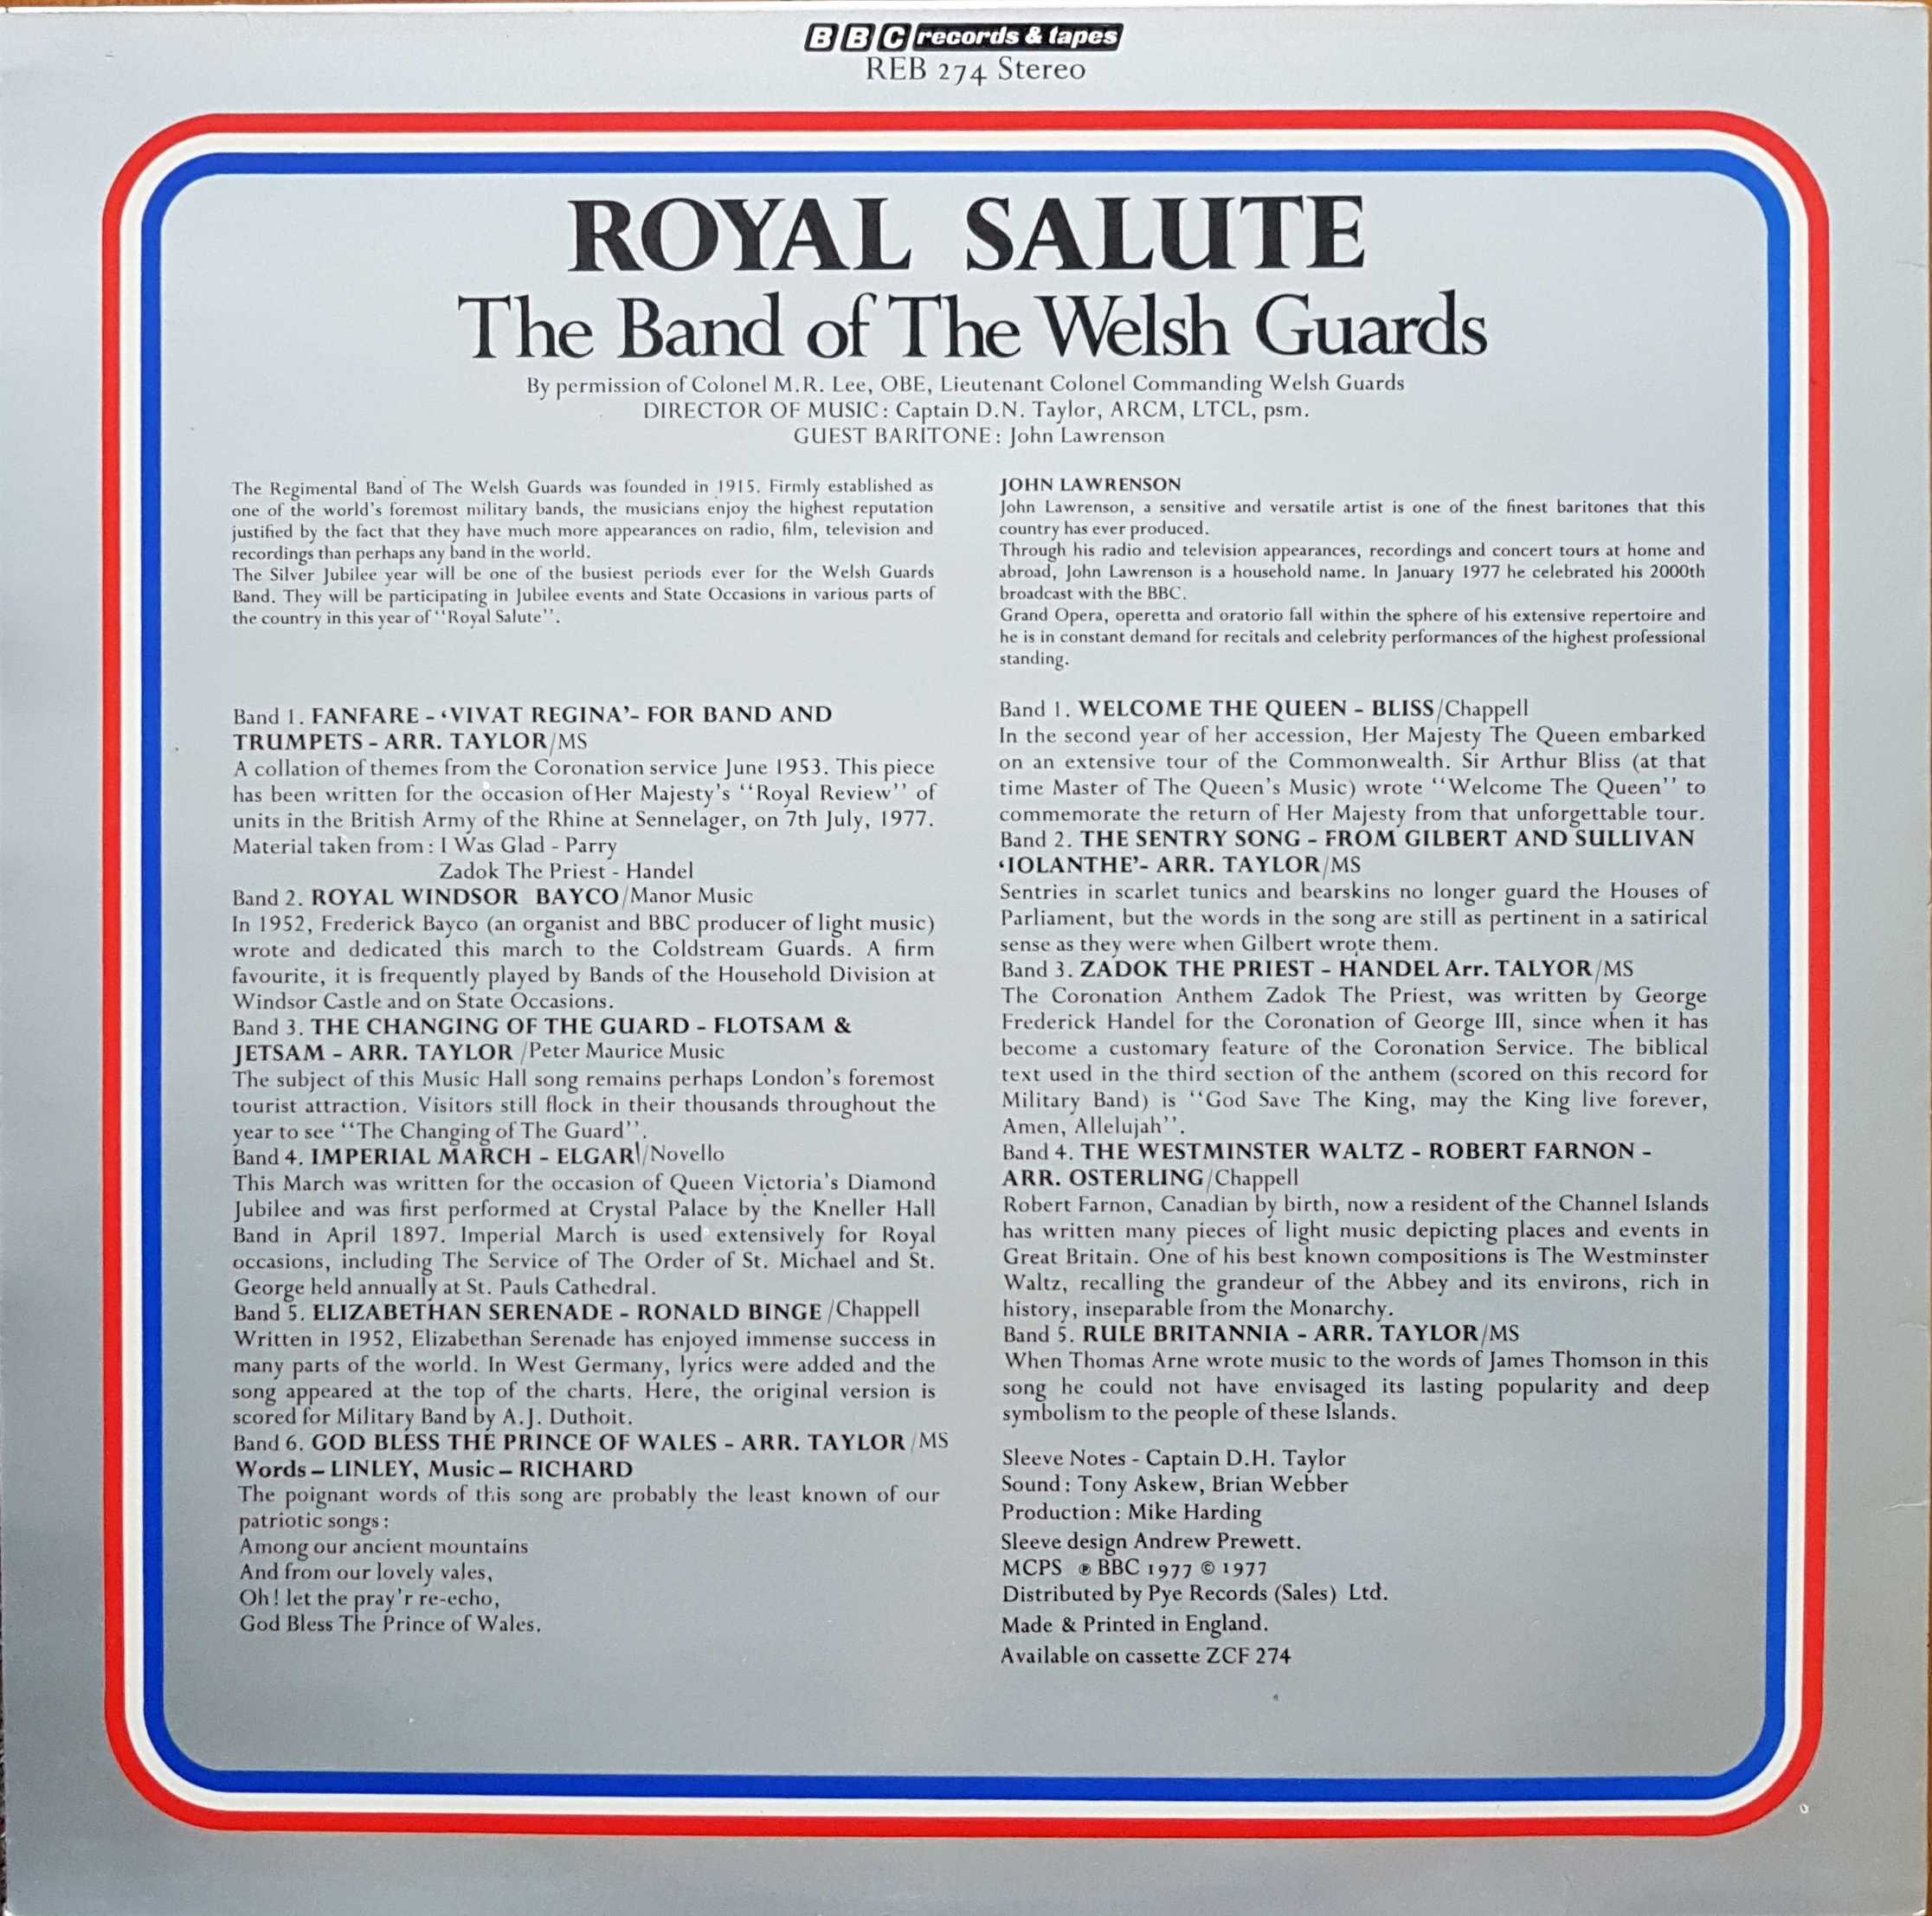 Picture of REB 274 The silver jubilee - Royal salute by artist The band of The Welsh Guard from the BBC records and Tapes library